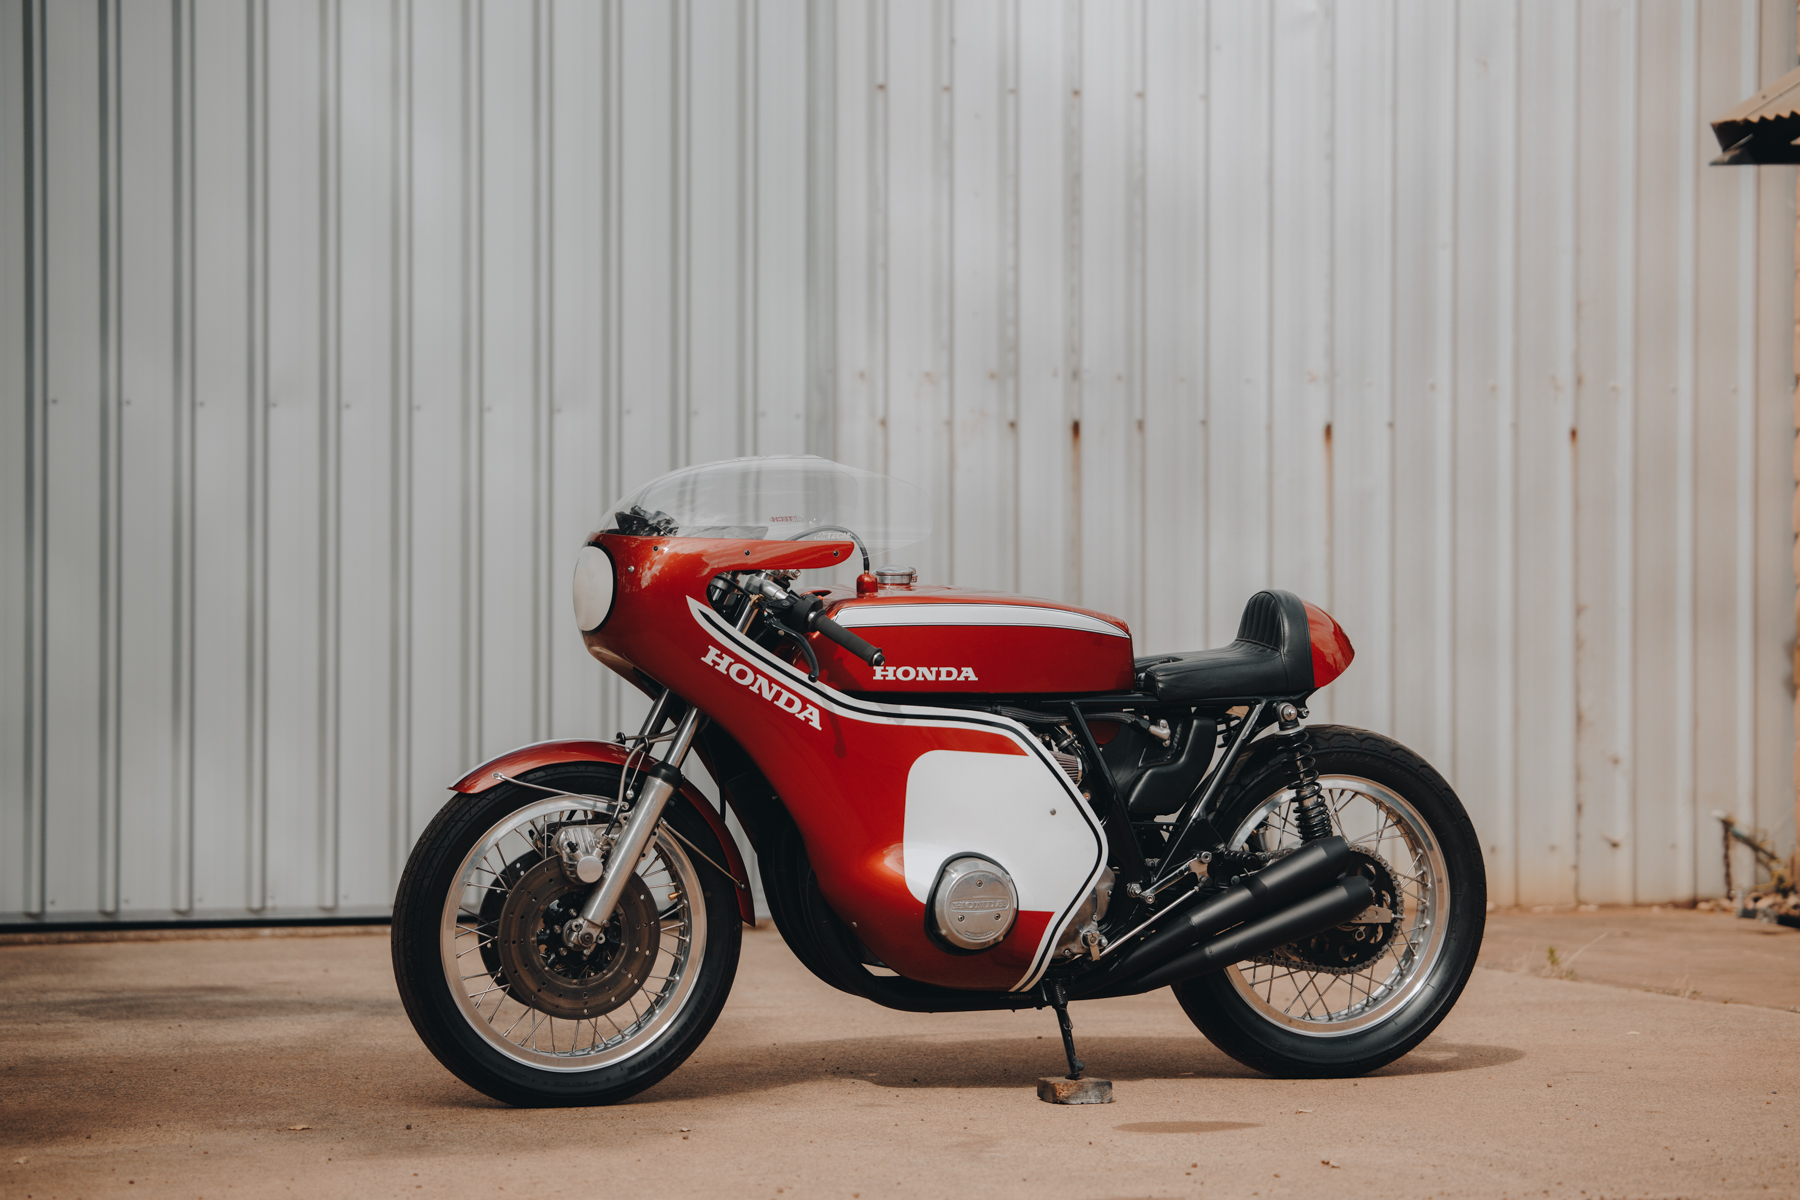 Photo of a Honda CR750 motorcycle parked in front of a shed